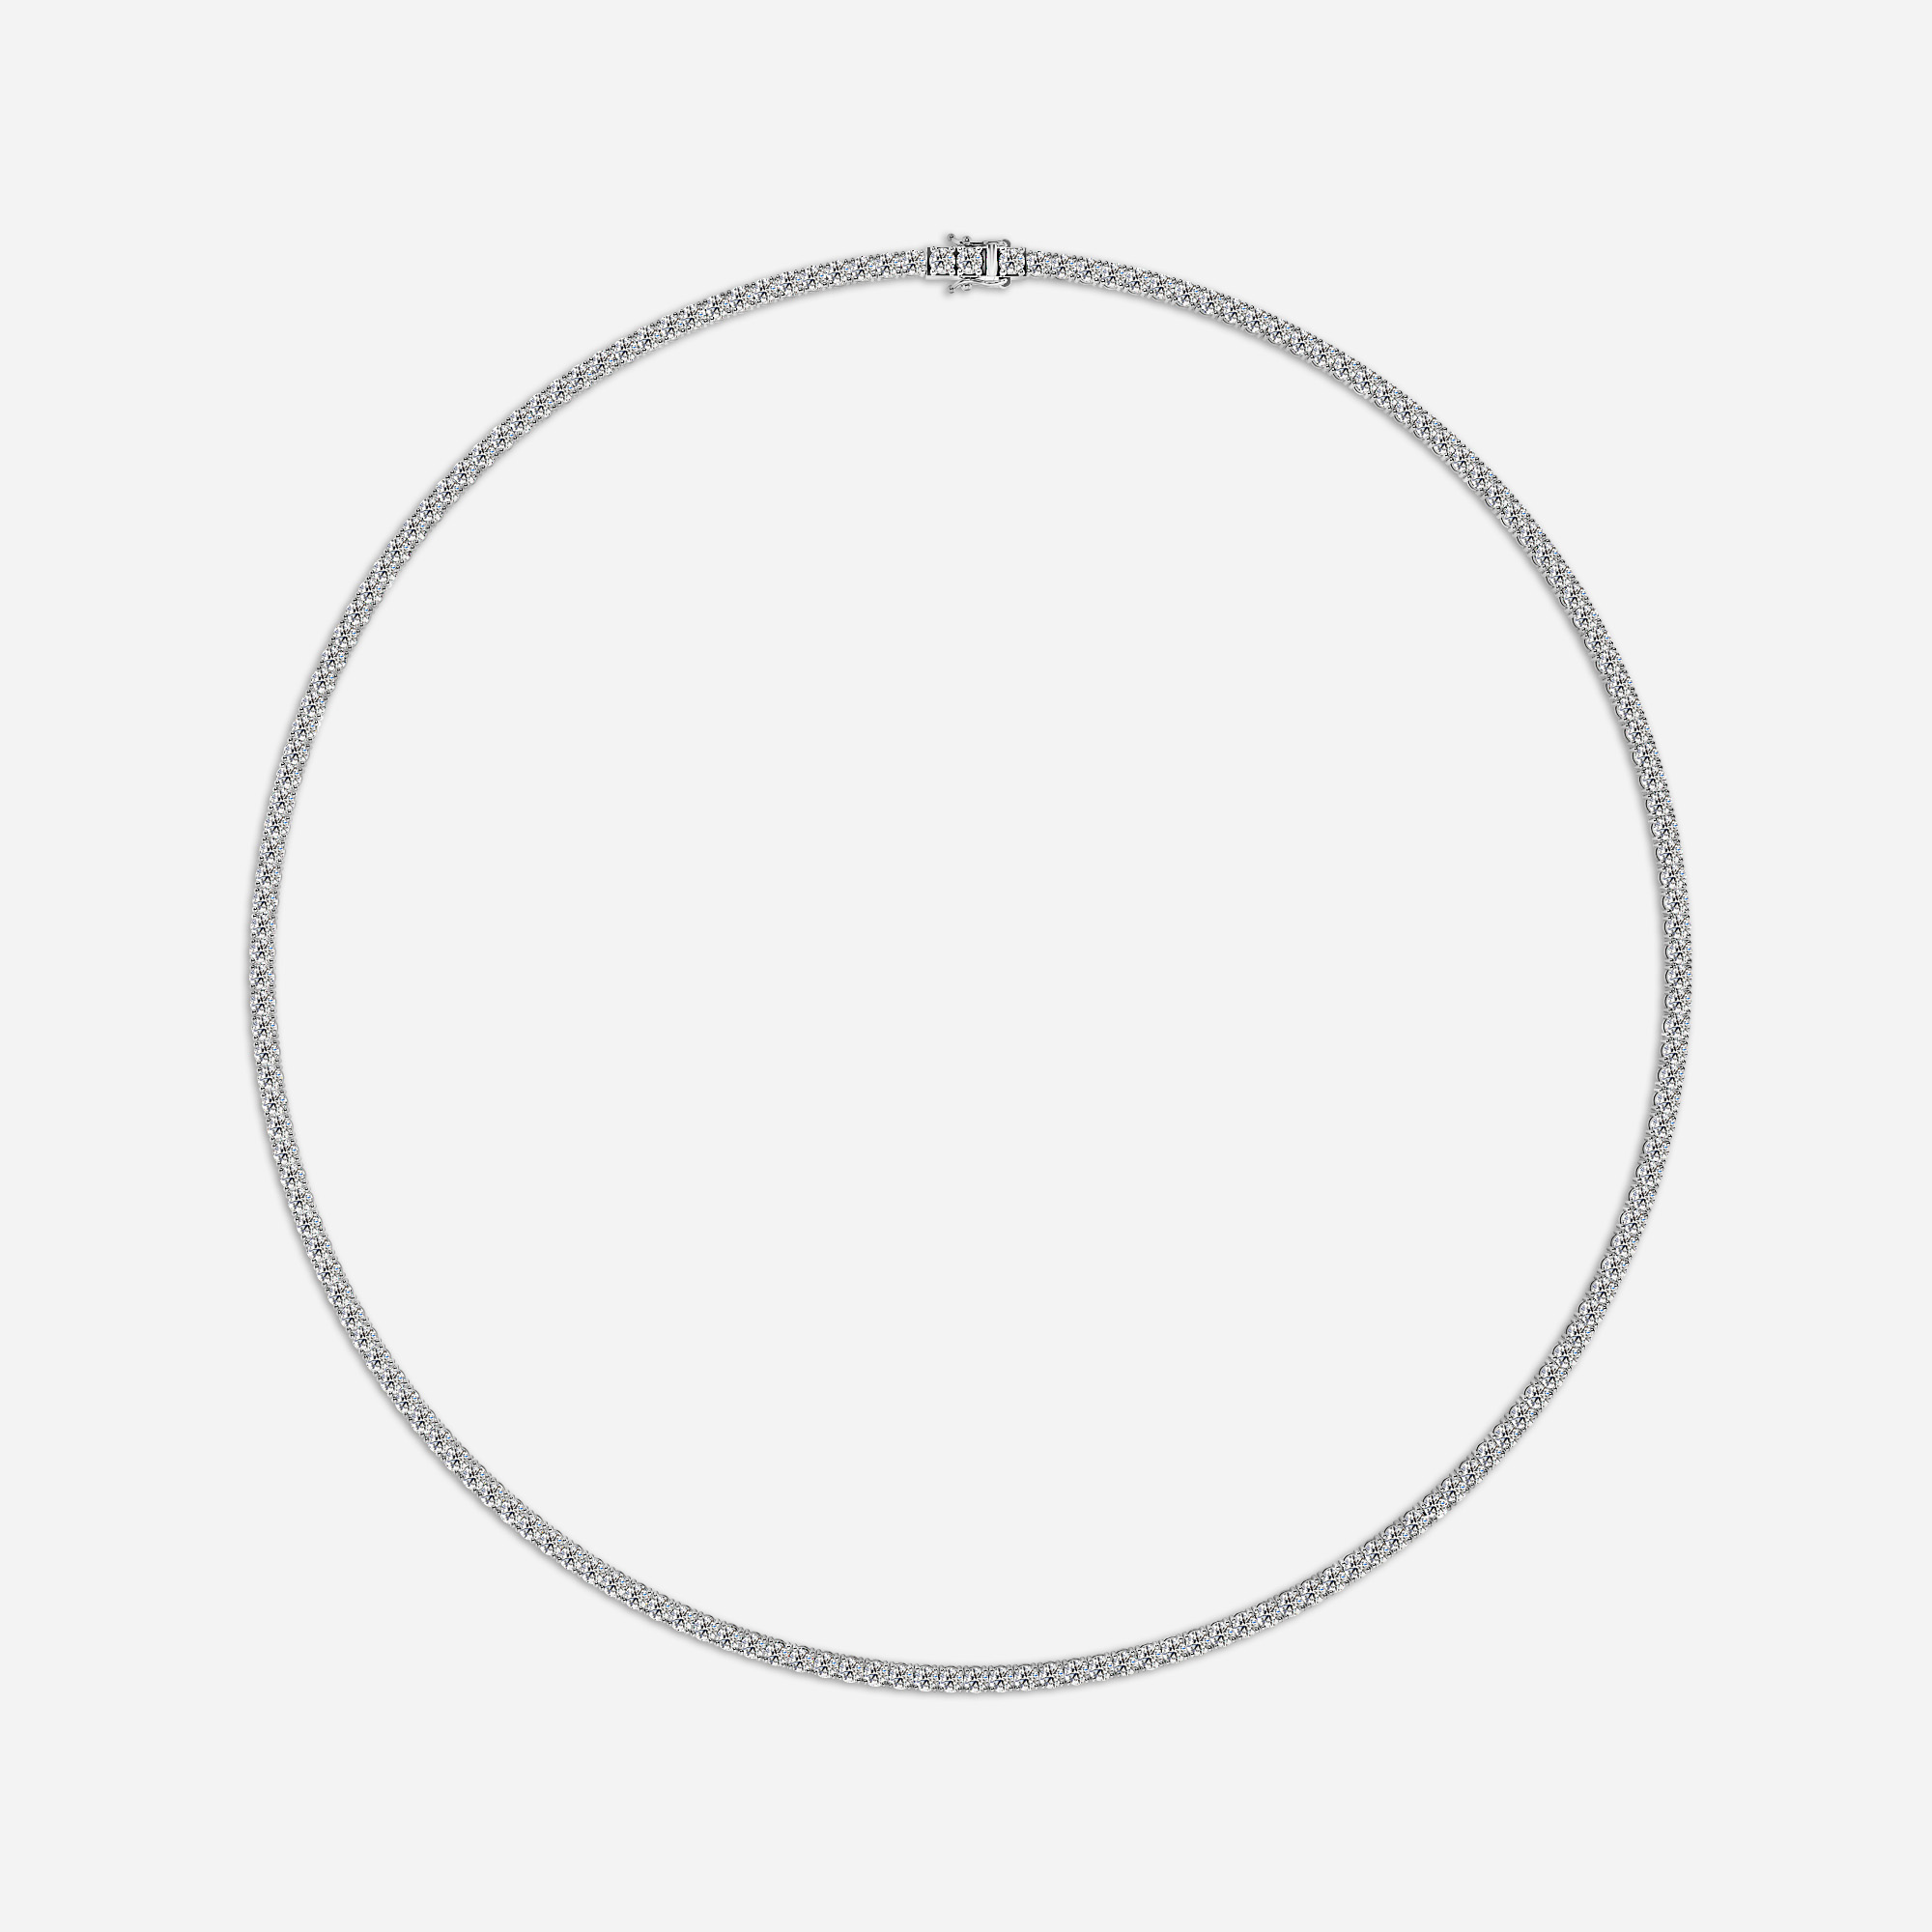 10.33 Ct Diamond Tennis Necklaces In White Gold